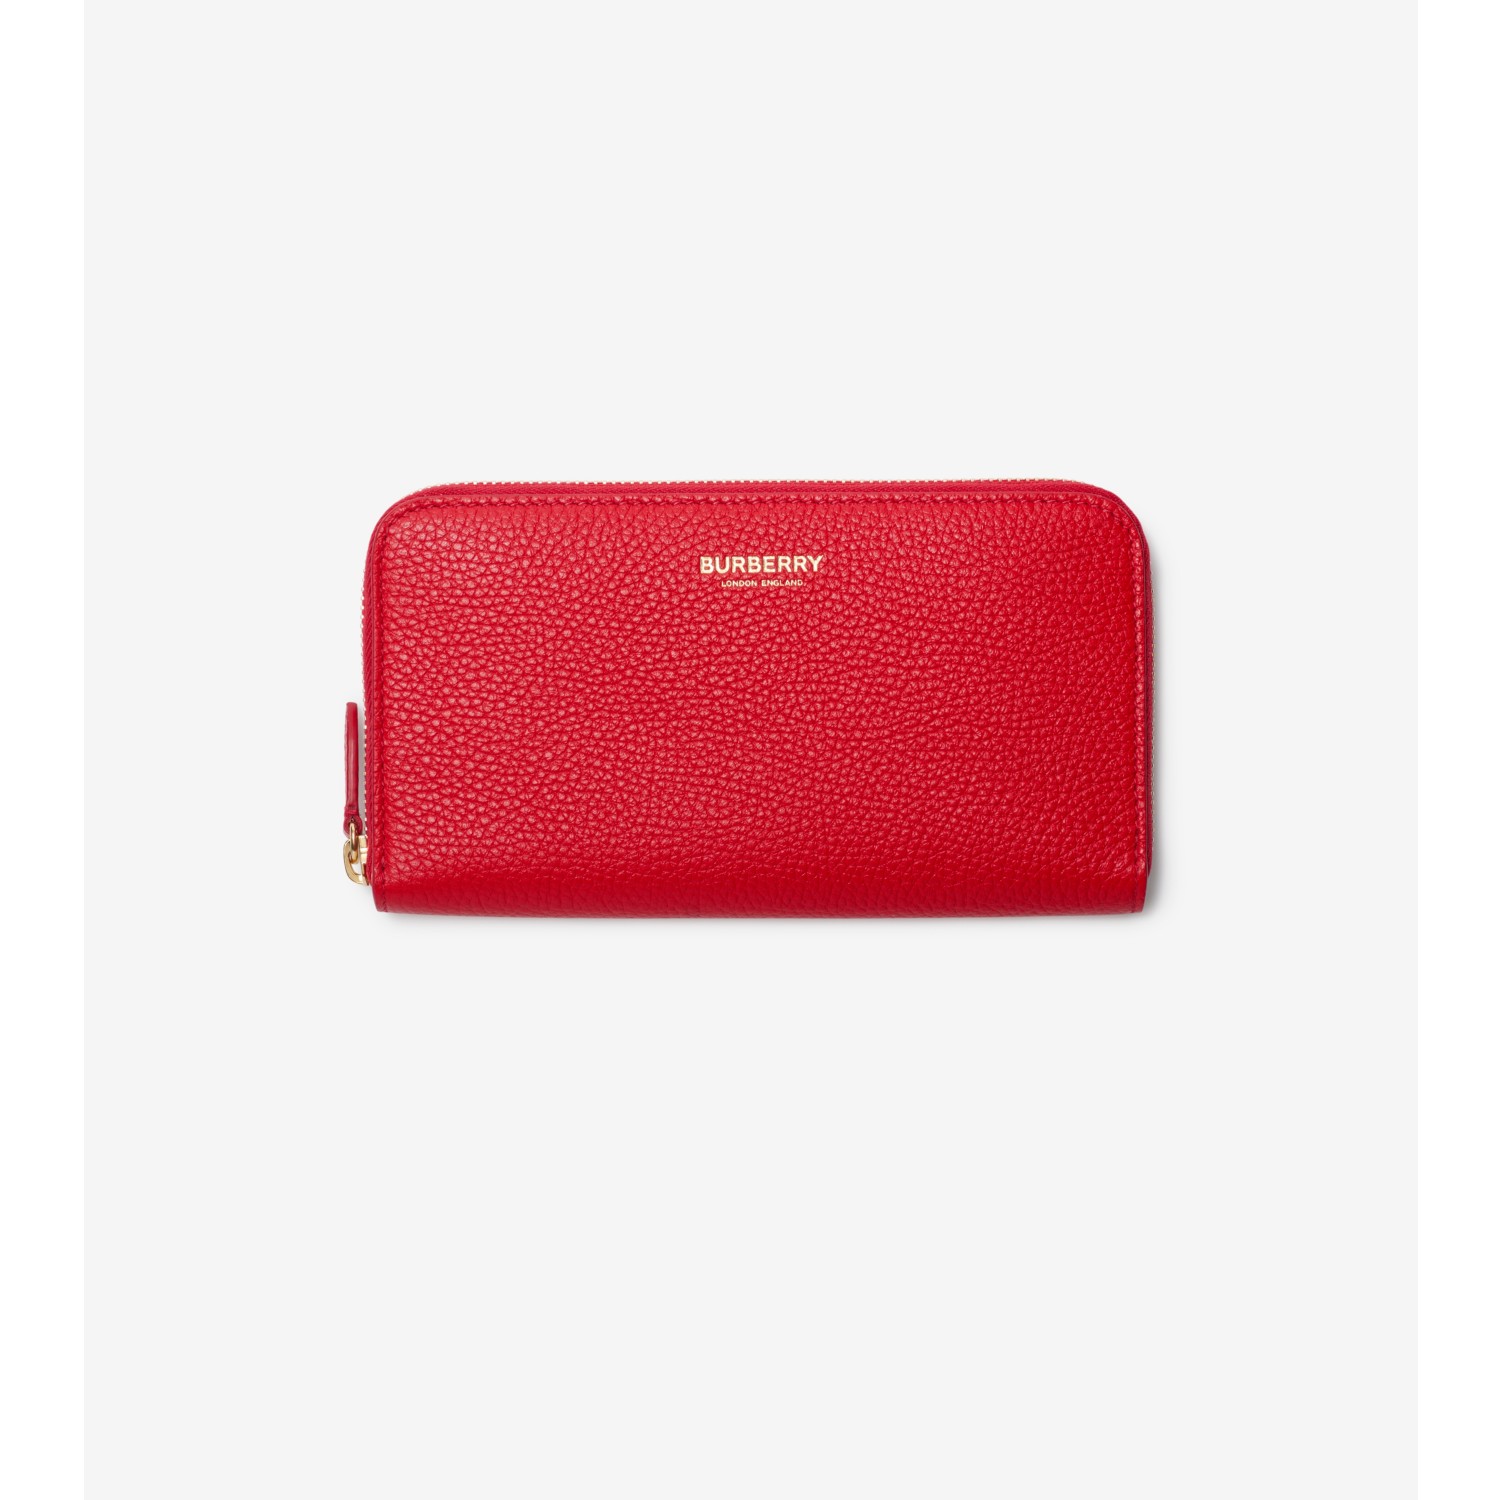 Leather Zip Wallet in Bright red